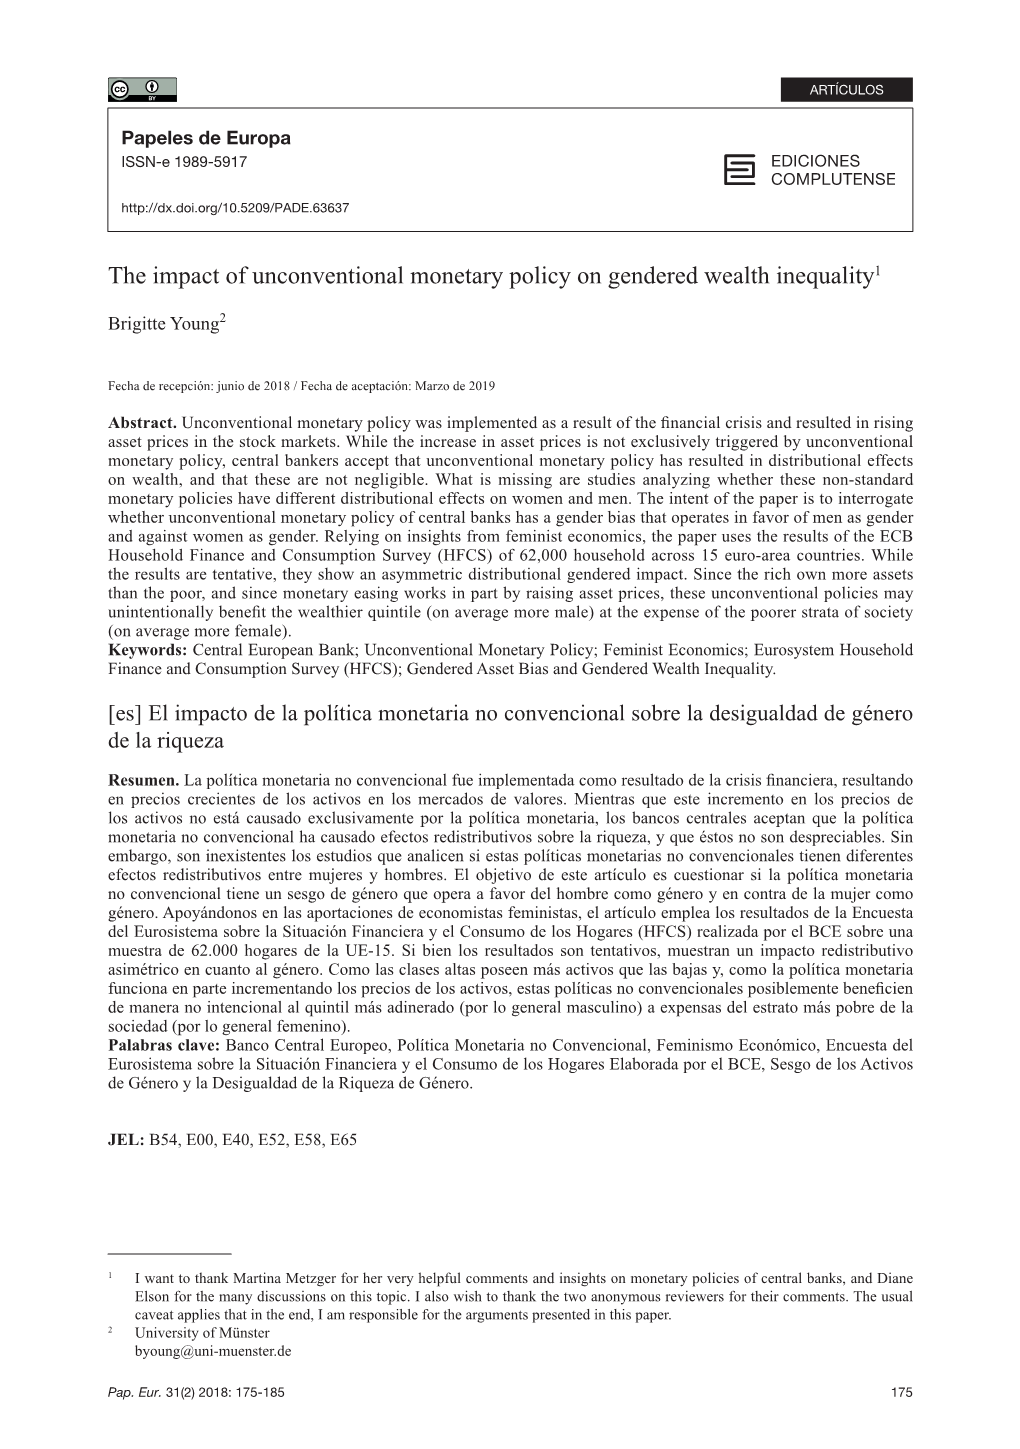 The Impact of Unconventional Monetary Policy on Gendered Wealth Inequality1